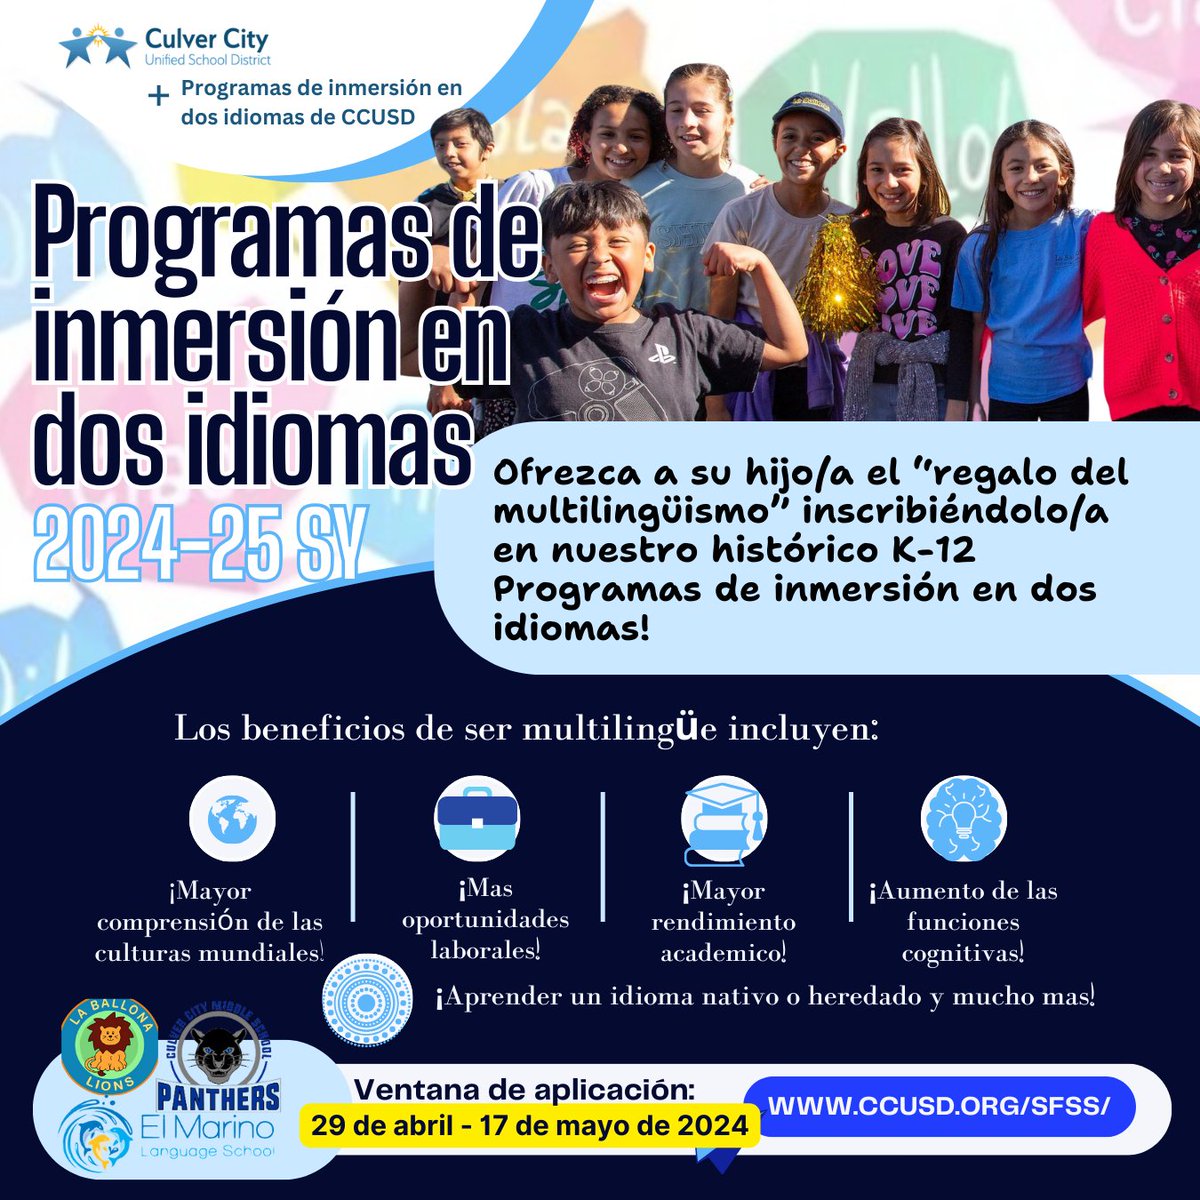 The application window for CCUSD's popular Dual Language Programs will be open Monday, April 29- Friday, May 17. Visit ccusd.org/sfss/ for more information.